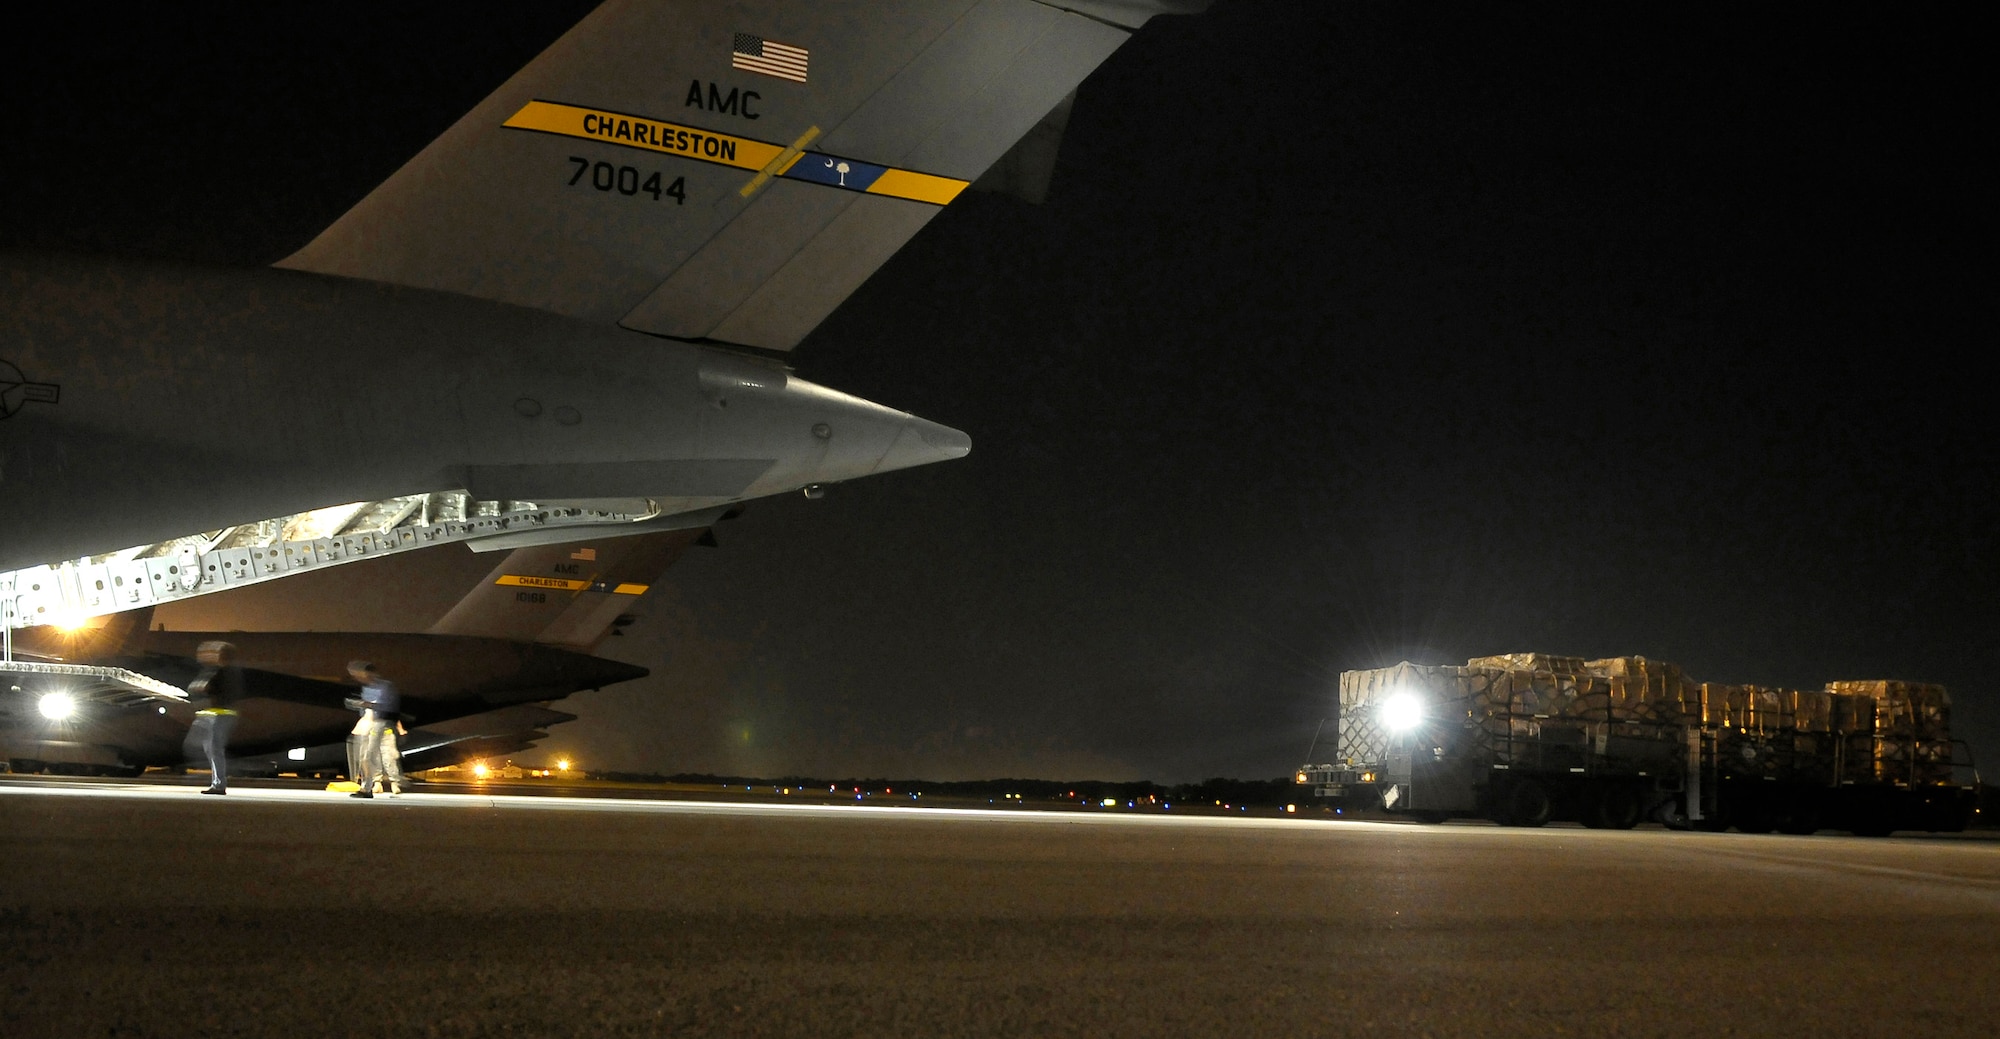 Airmen airdrop relief supplies to Haitians > Air Force > Article Display